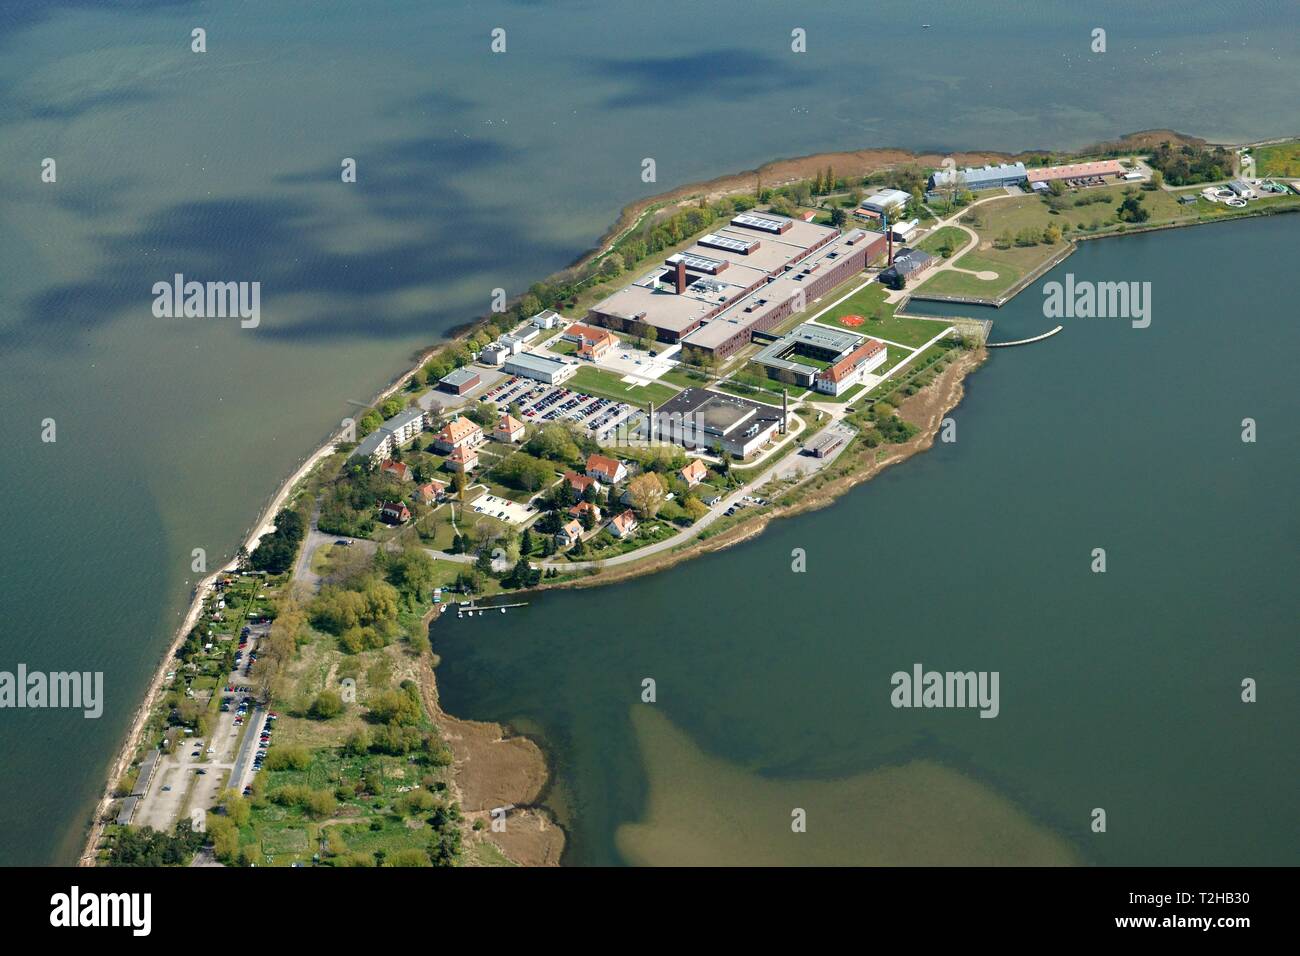 Federal Research Institute for Animal Health, aerial view, Riems Island, Mecklenburg-Western Pomerania, Germany Stock Photo